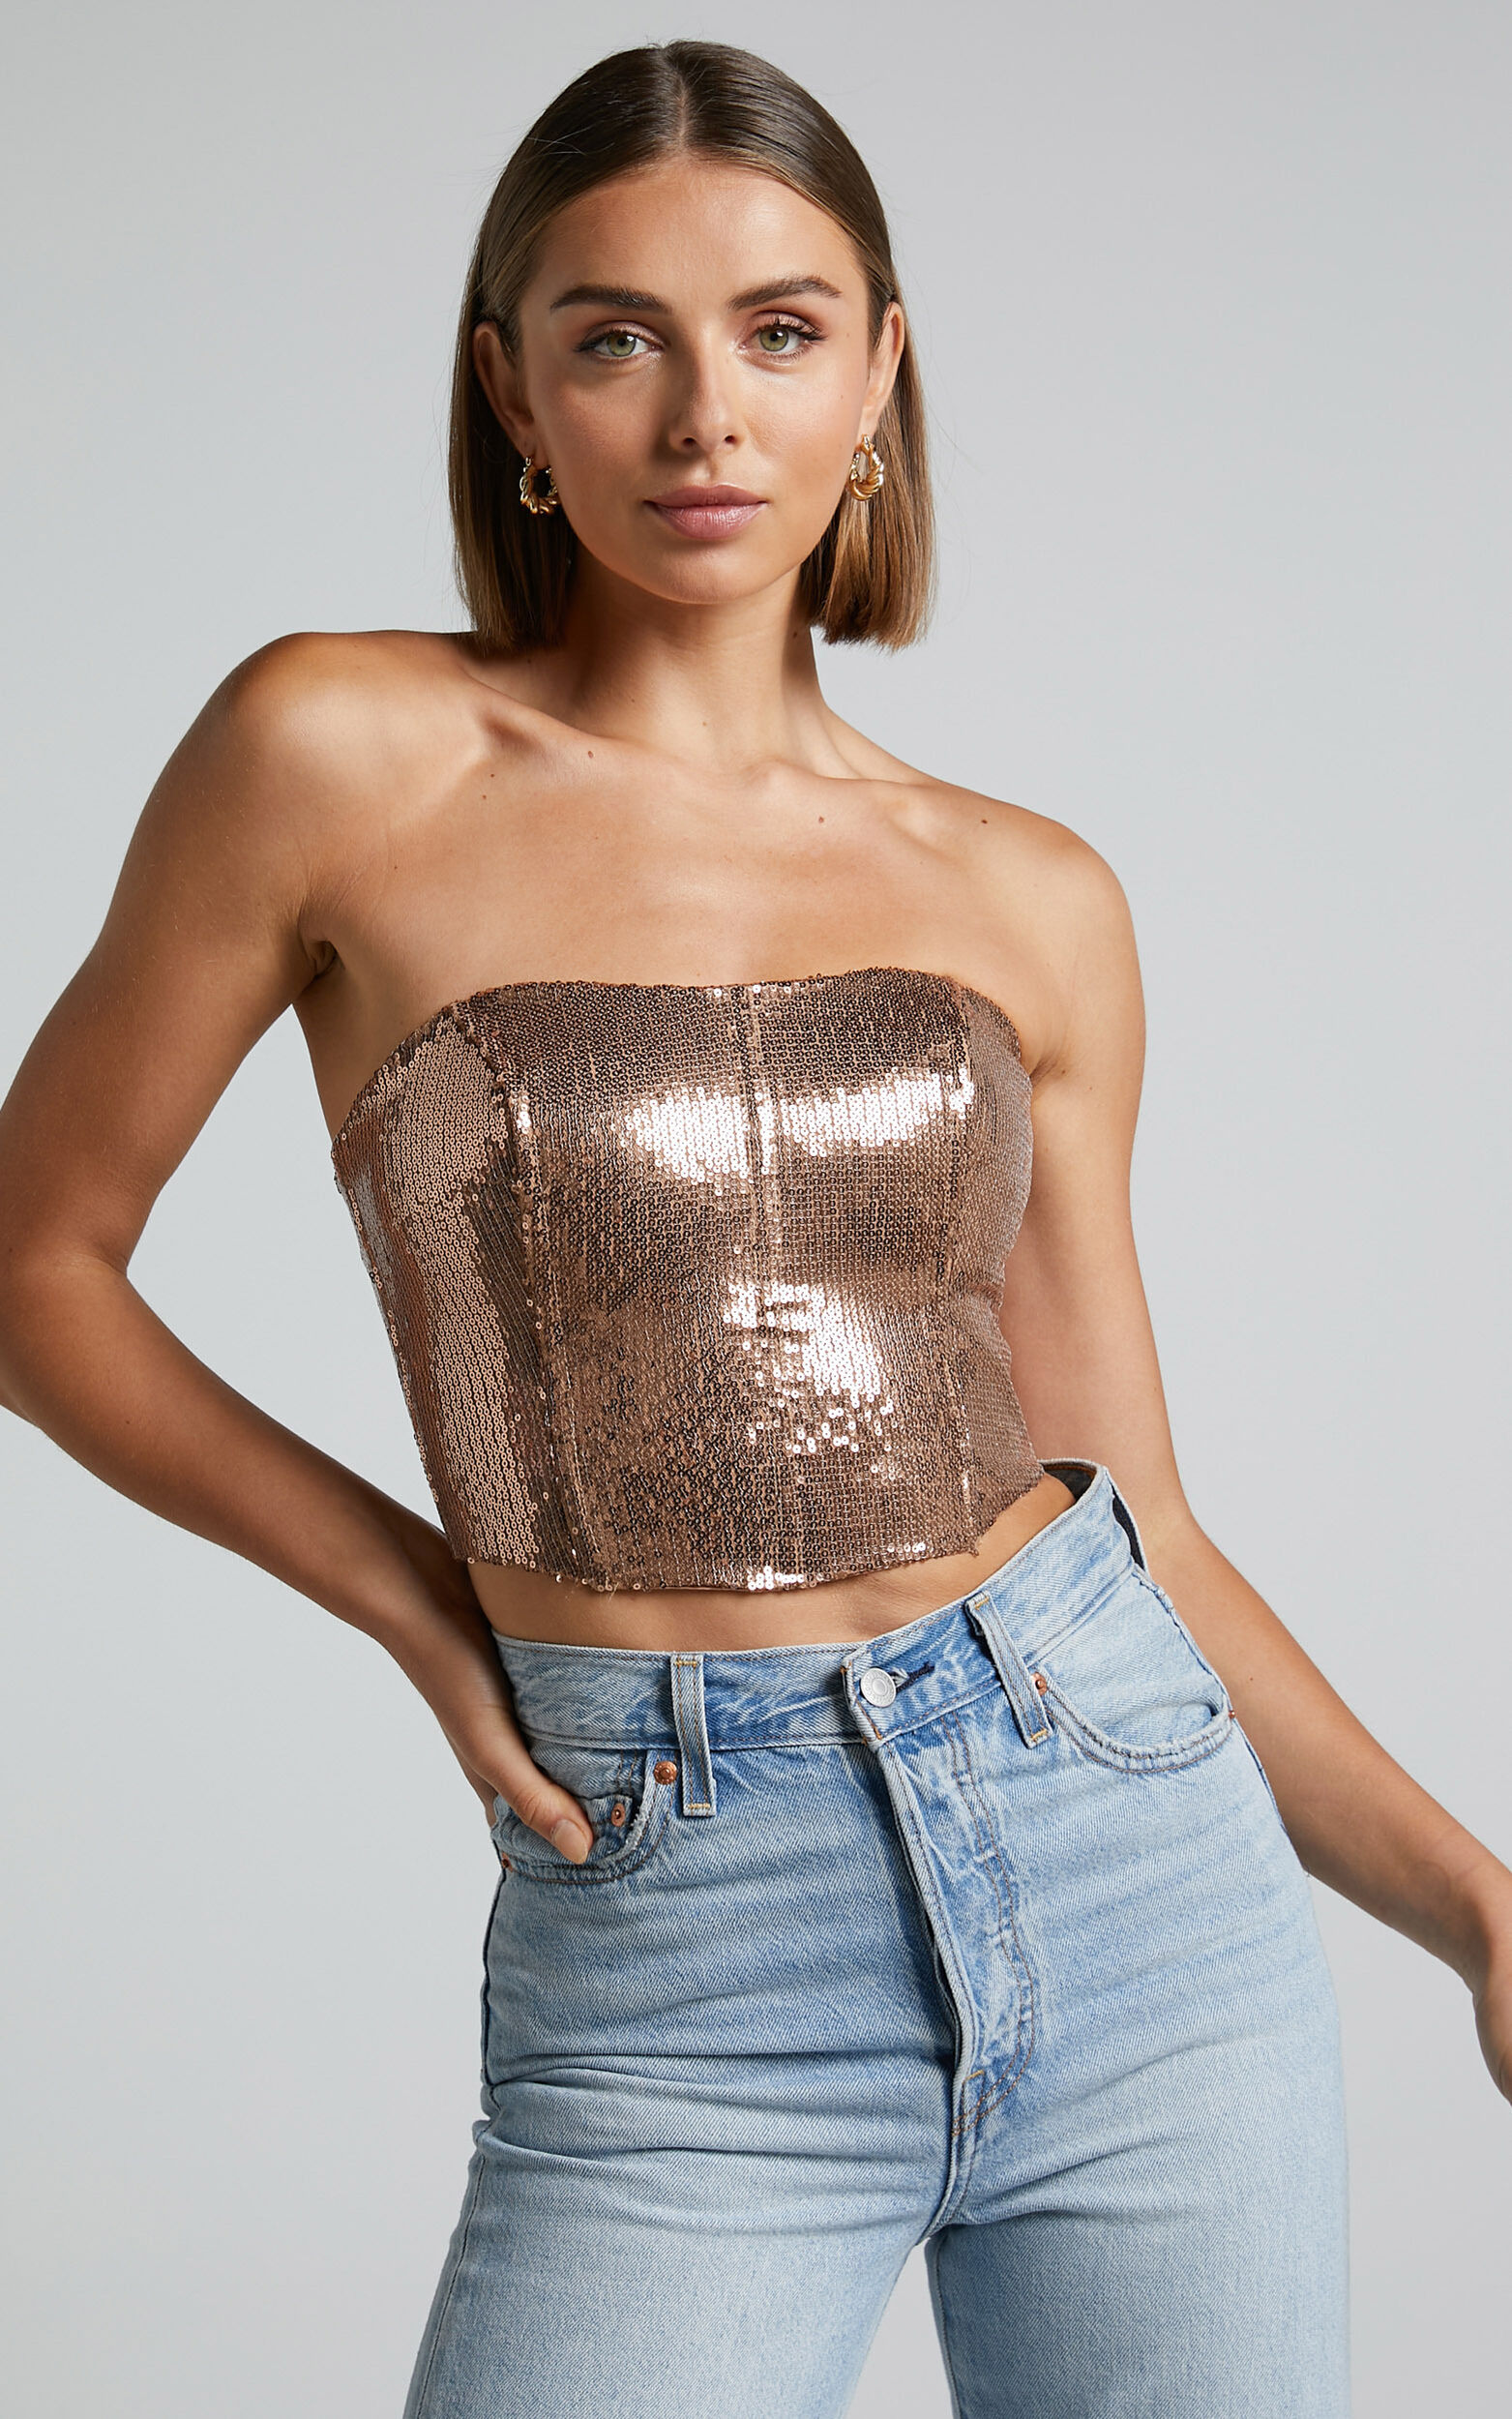 Dalphine Top - Sequin Strapless Corset Crop Top in Copper Gold - 04, GLD1